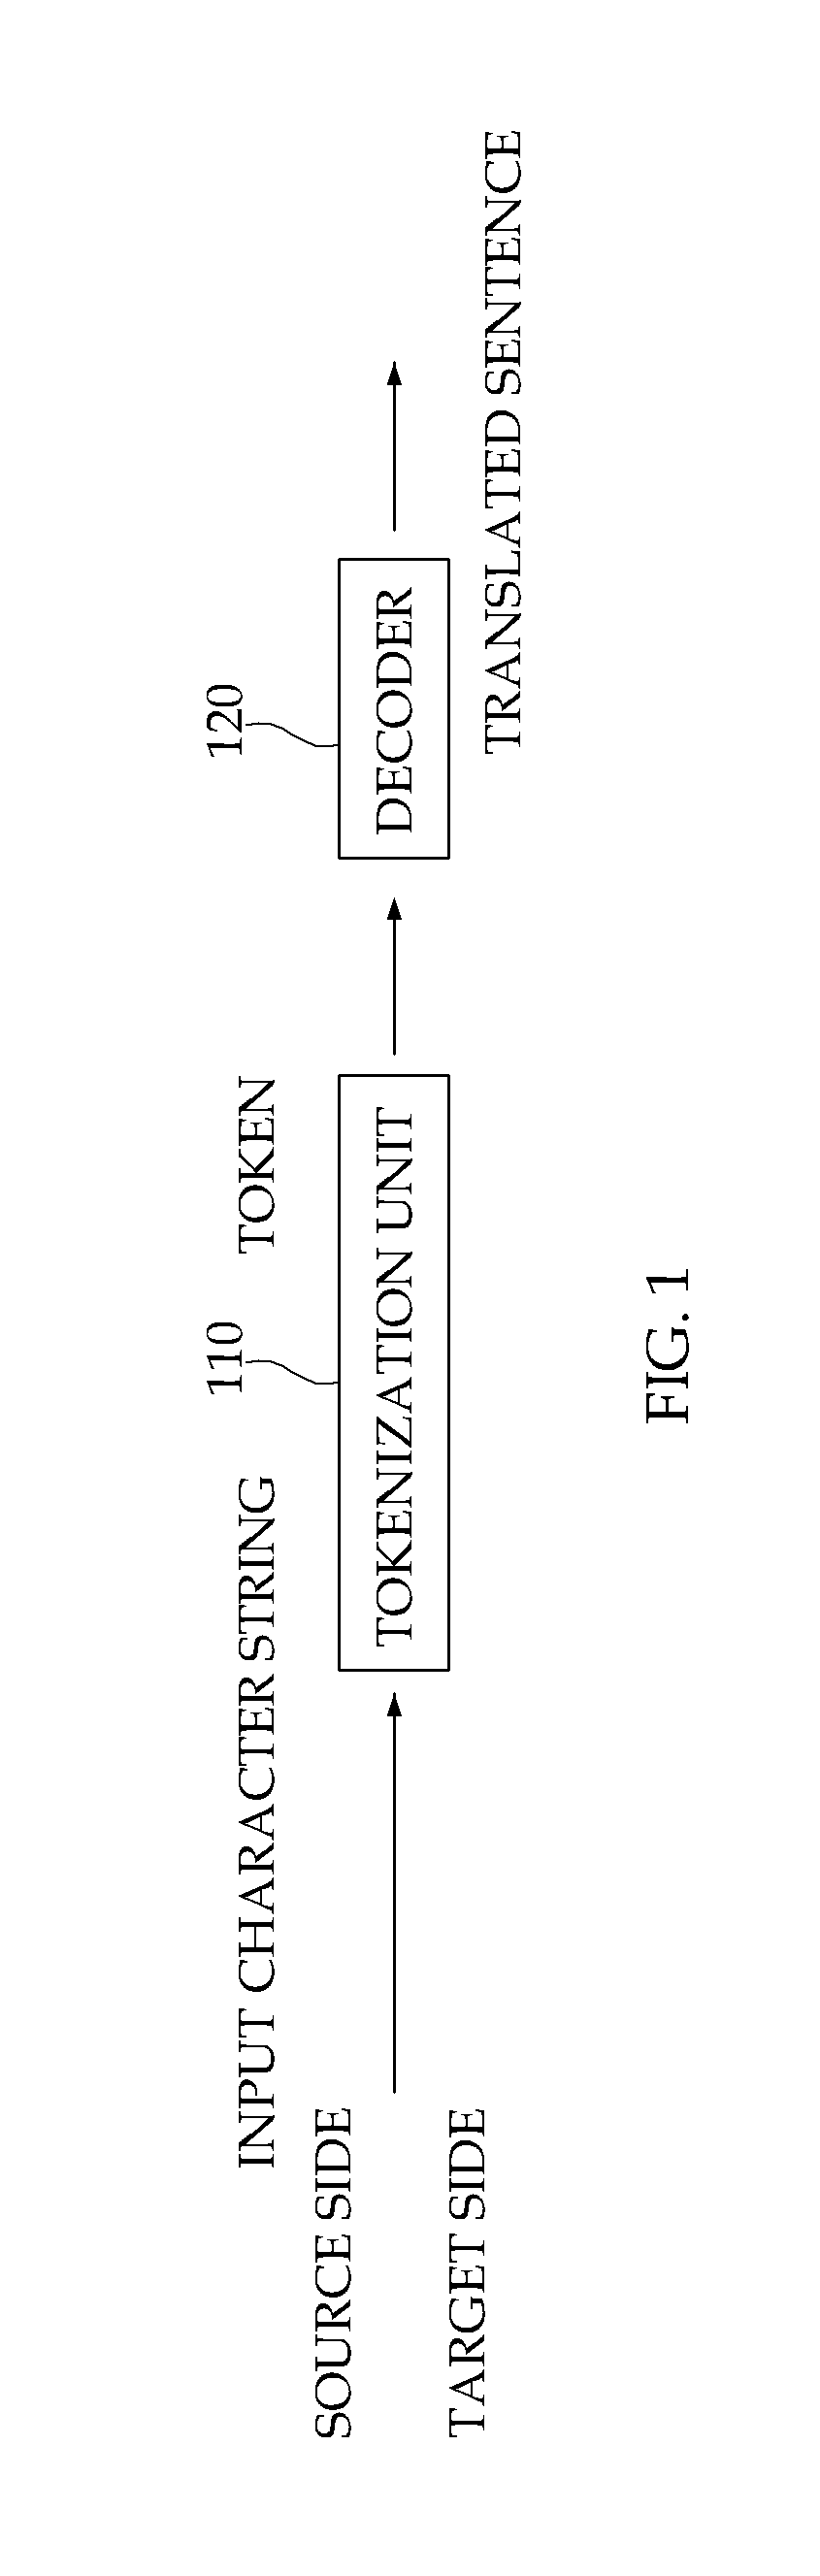 Apparatus and method for decoding using joint tokenization and translation